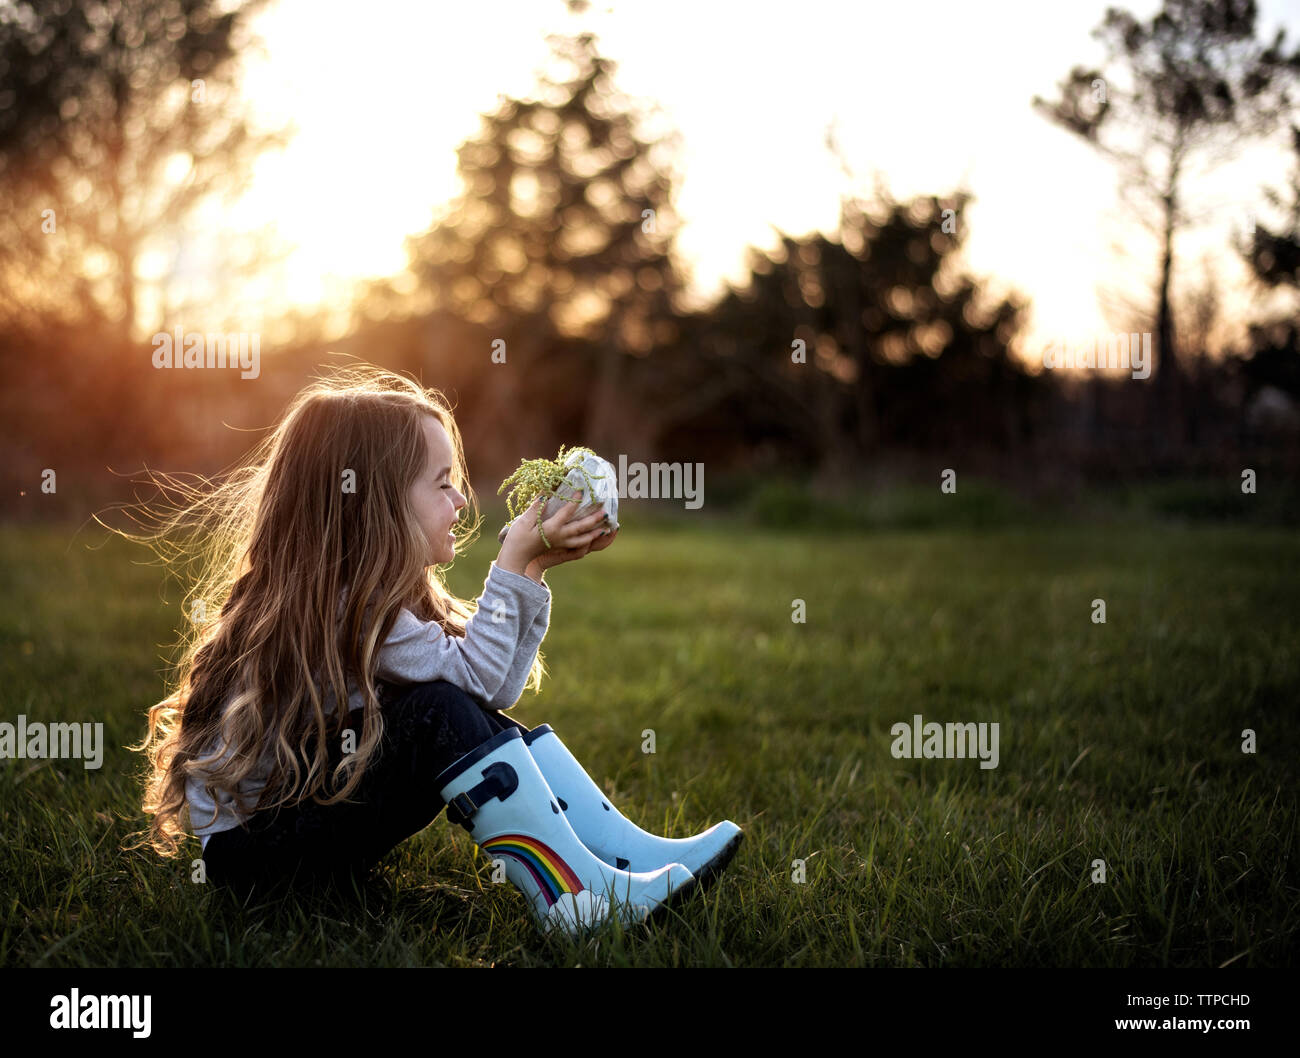 Happy young girl smiling while holding a plant au soleil Banque D'Images